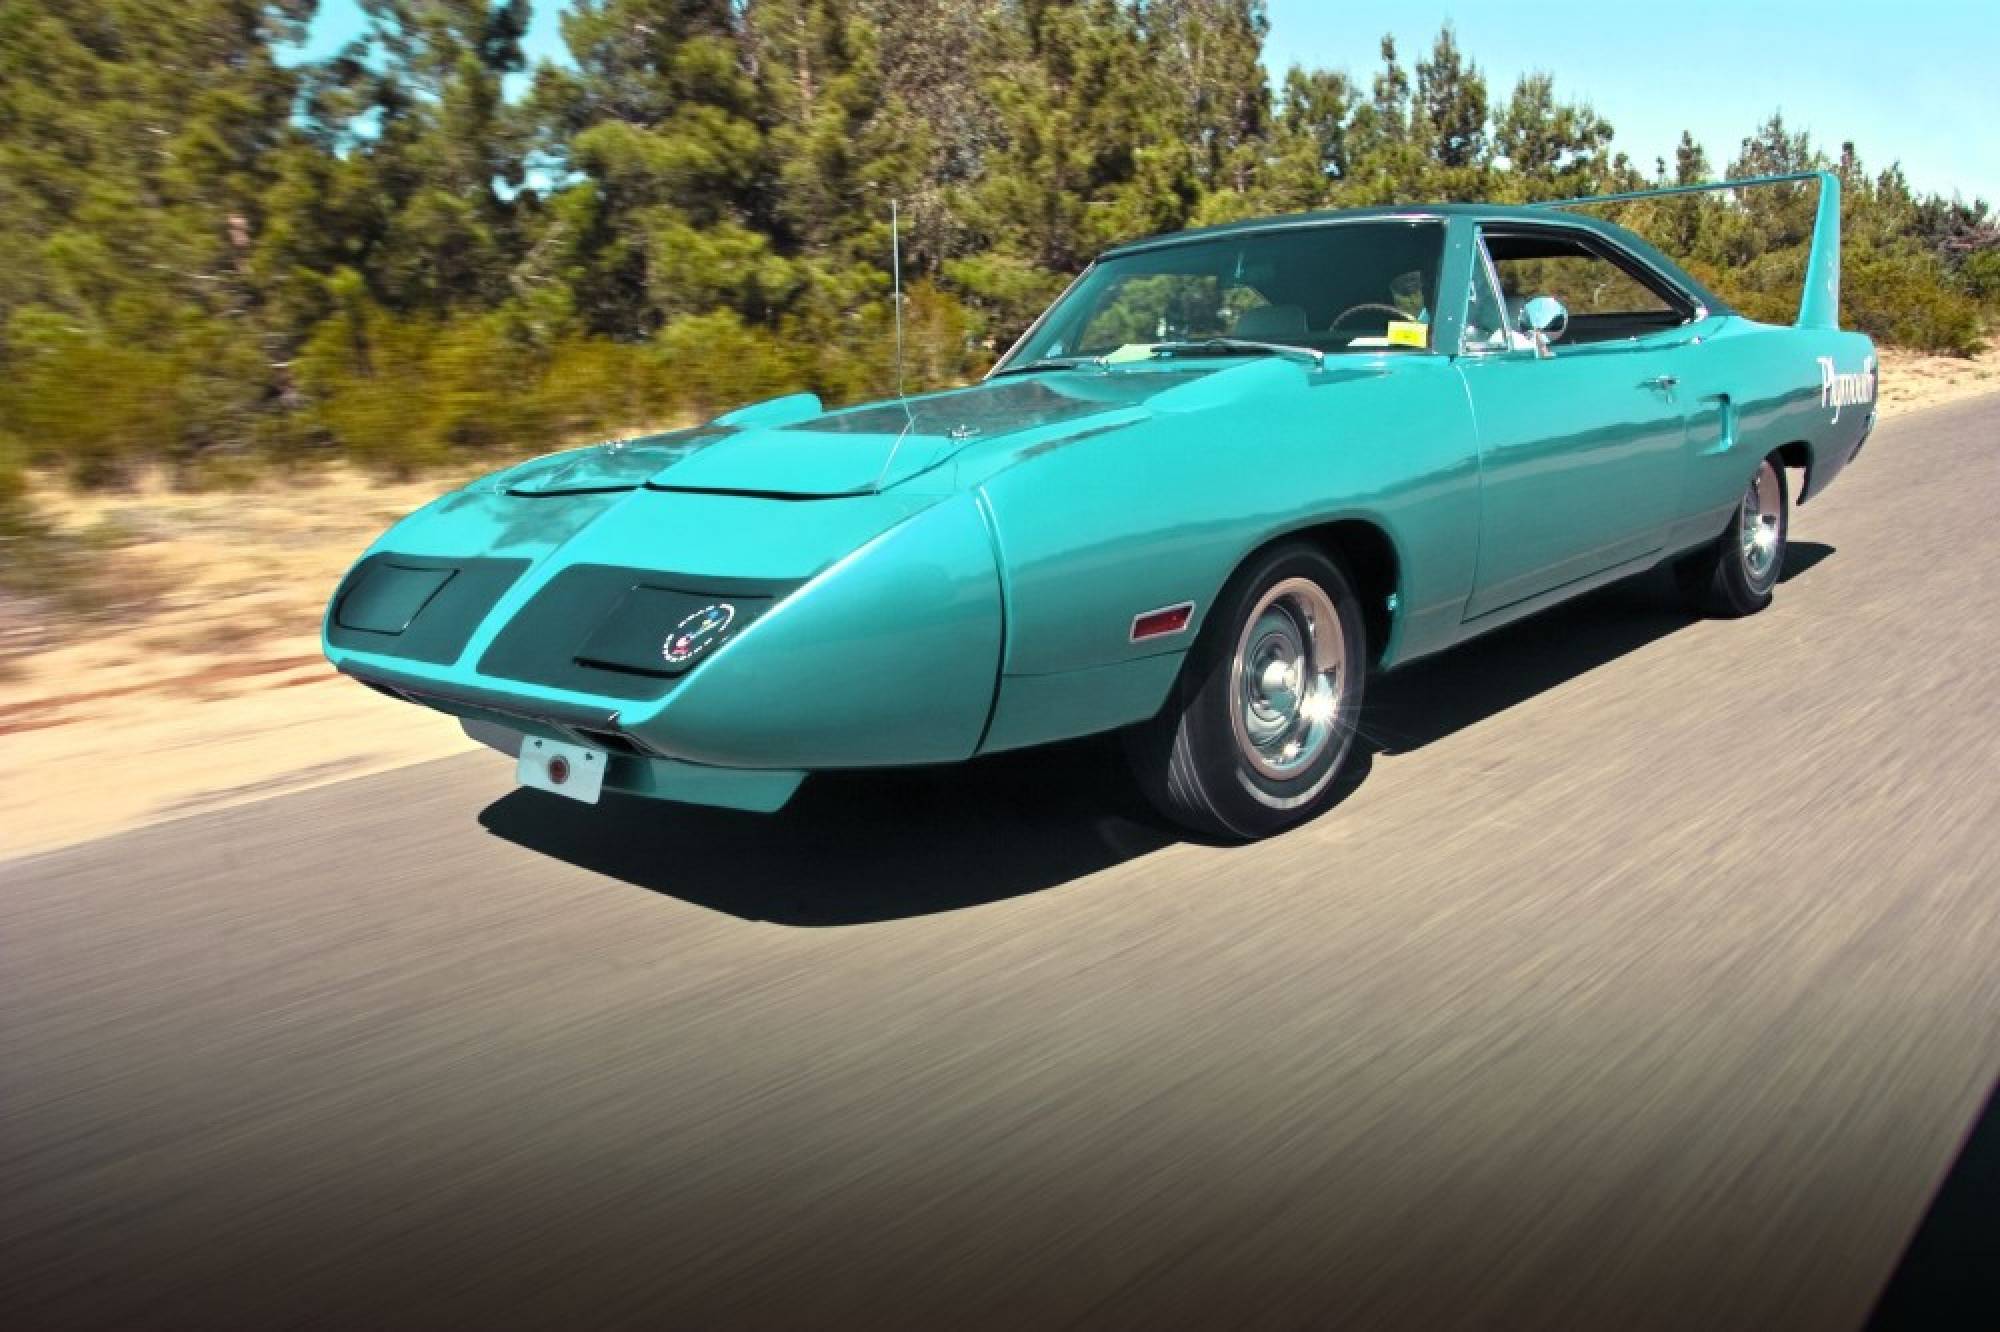 1970 Plymouth Superbird Backgrounds, Compatible - PC, Mobile, Gadgets| 2000x1332 px